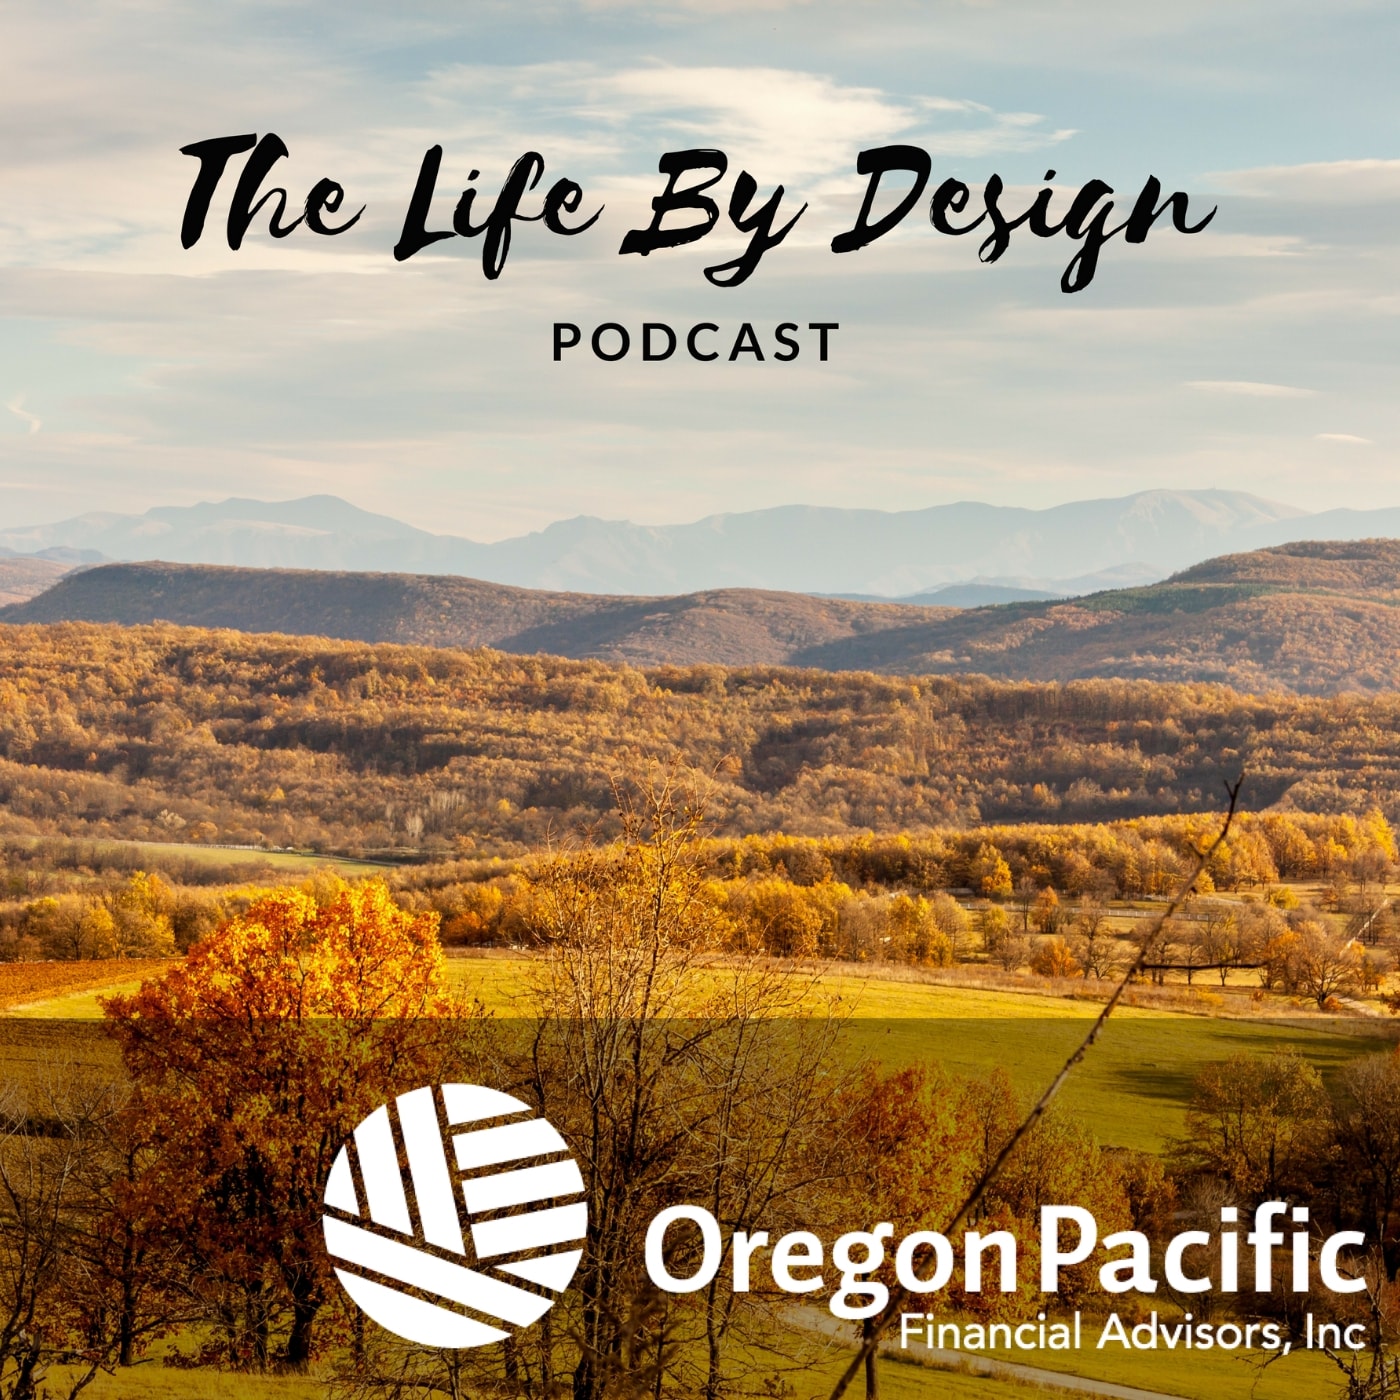 The Life By Design Podcast